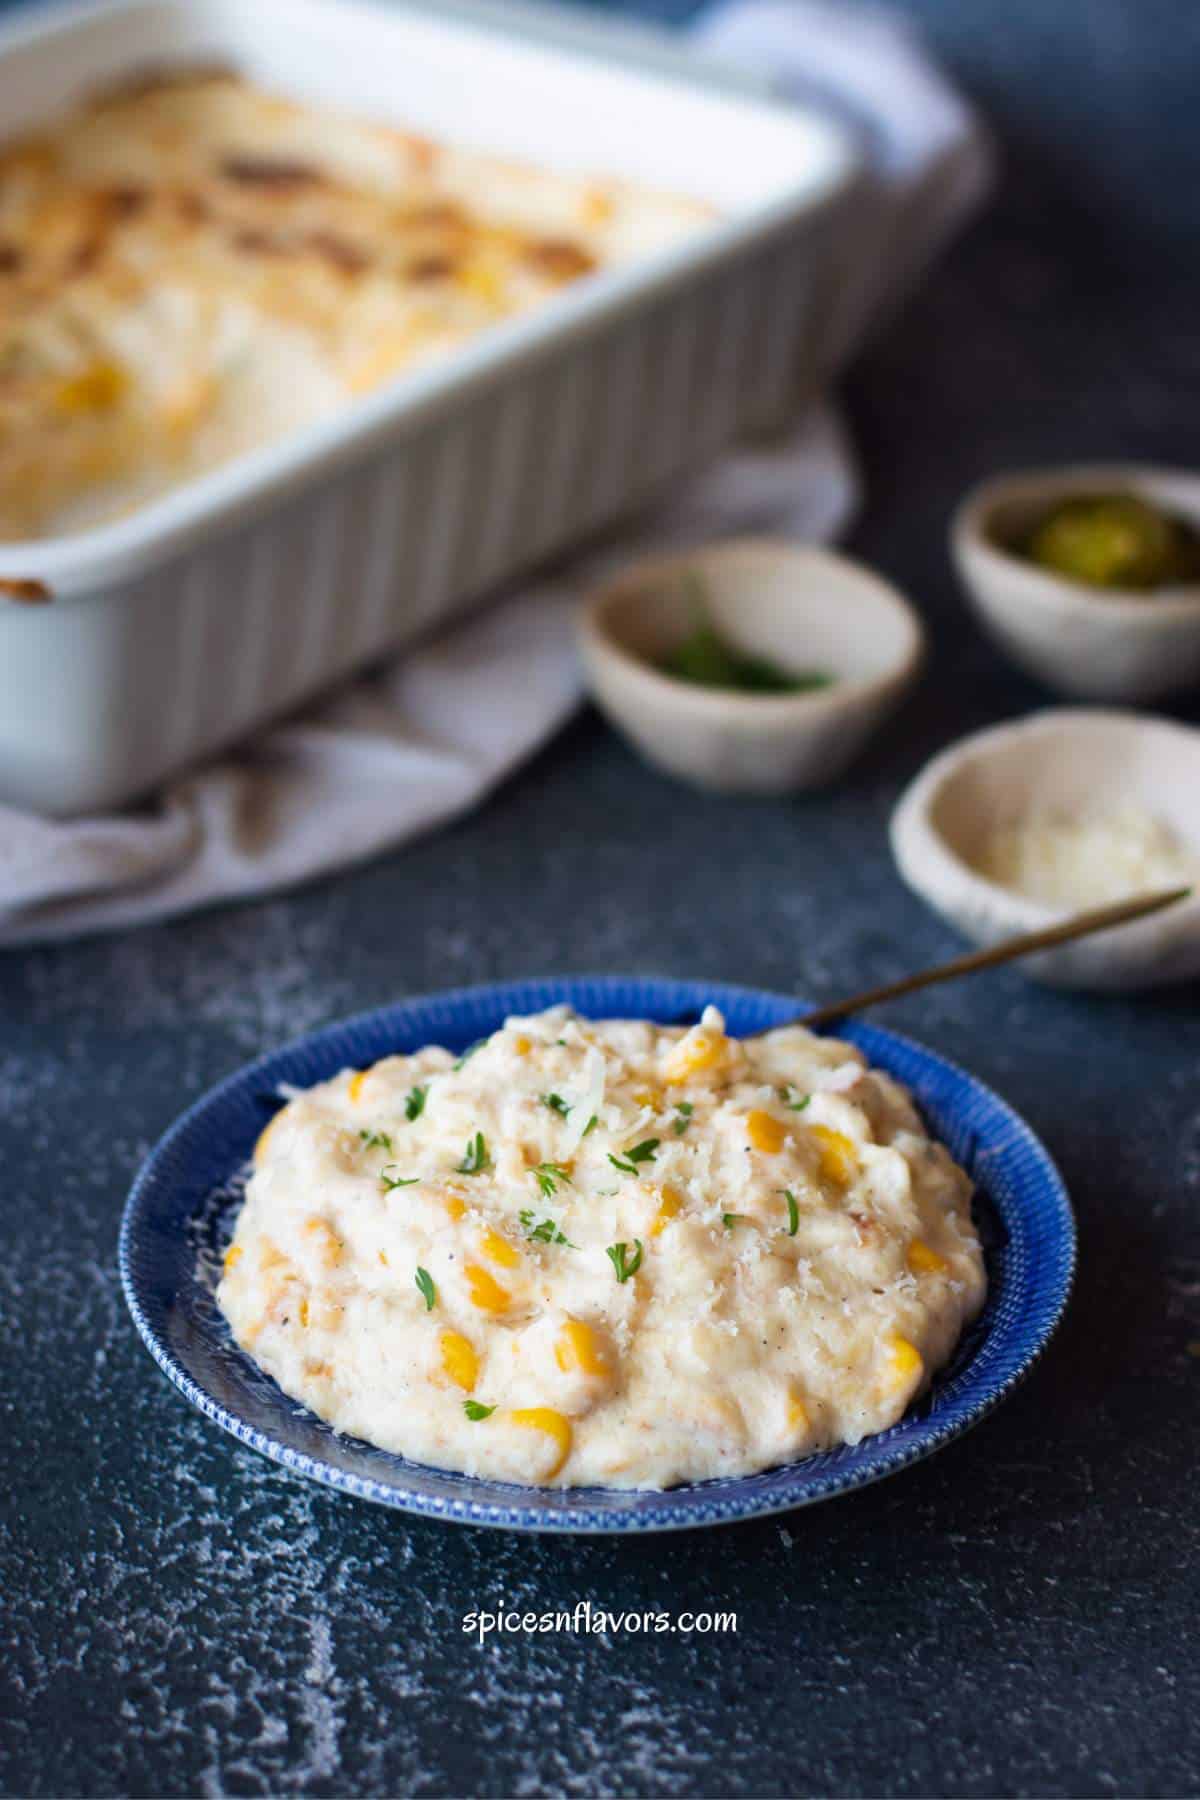 creamy corn casserole served on a blue plate with a garnish of cheese and herbs on top